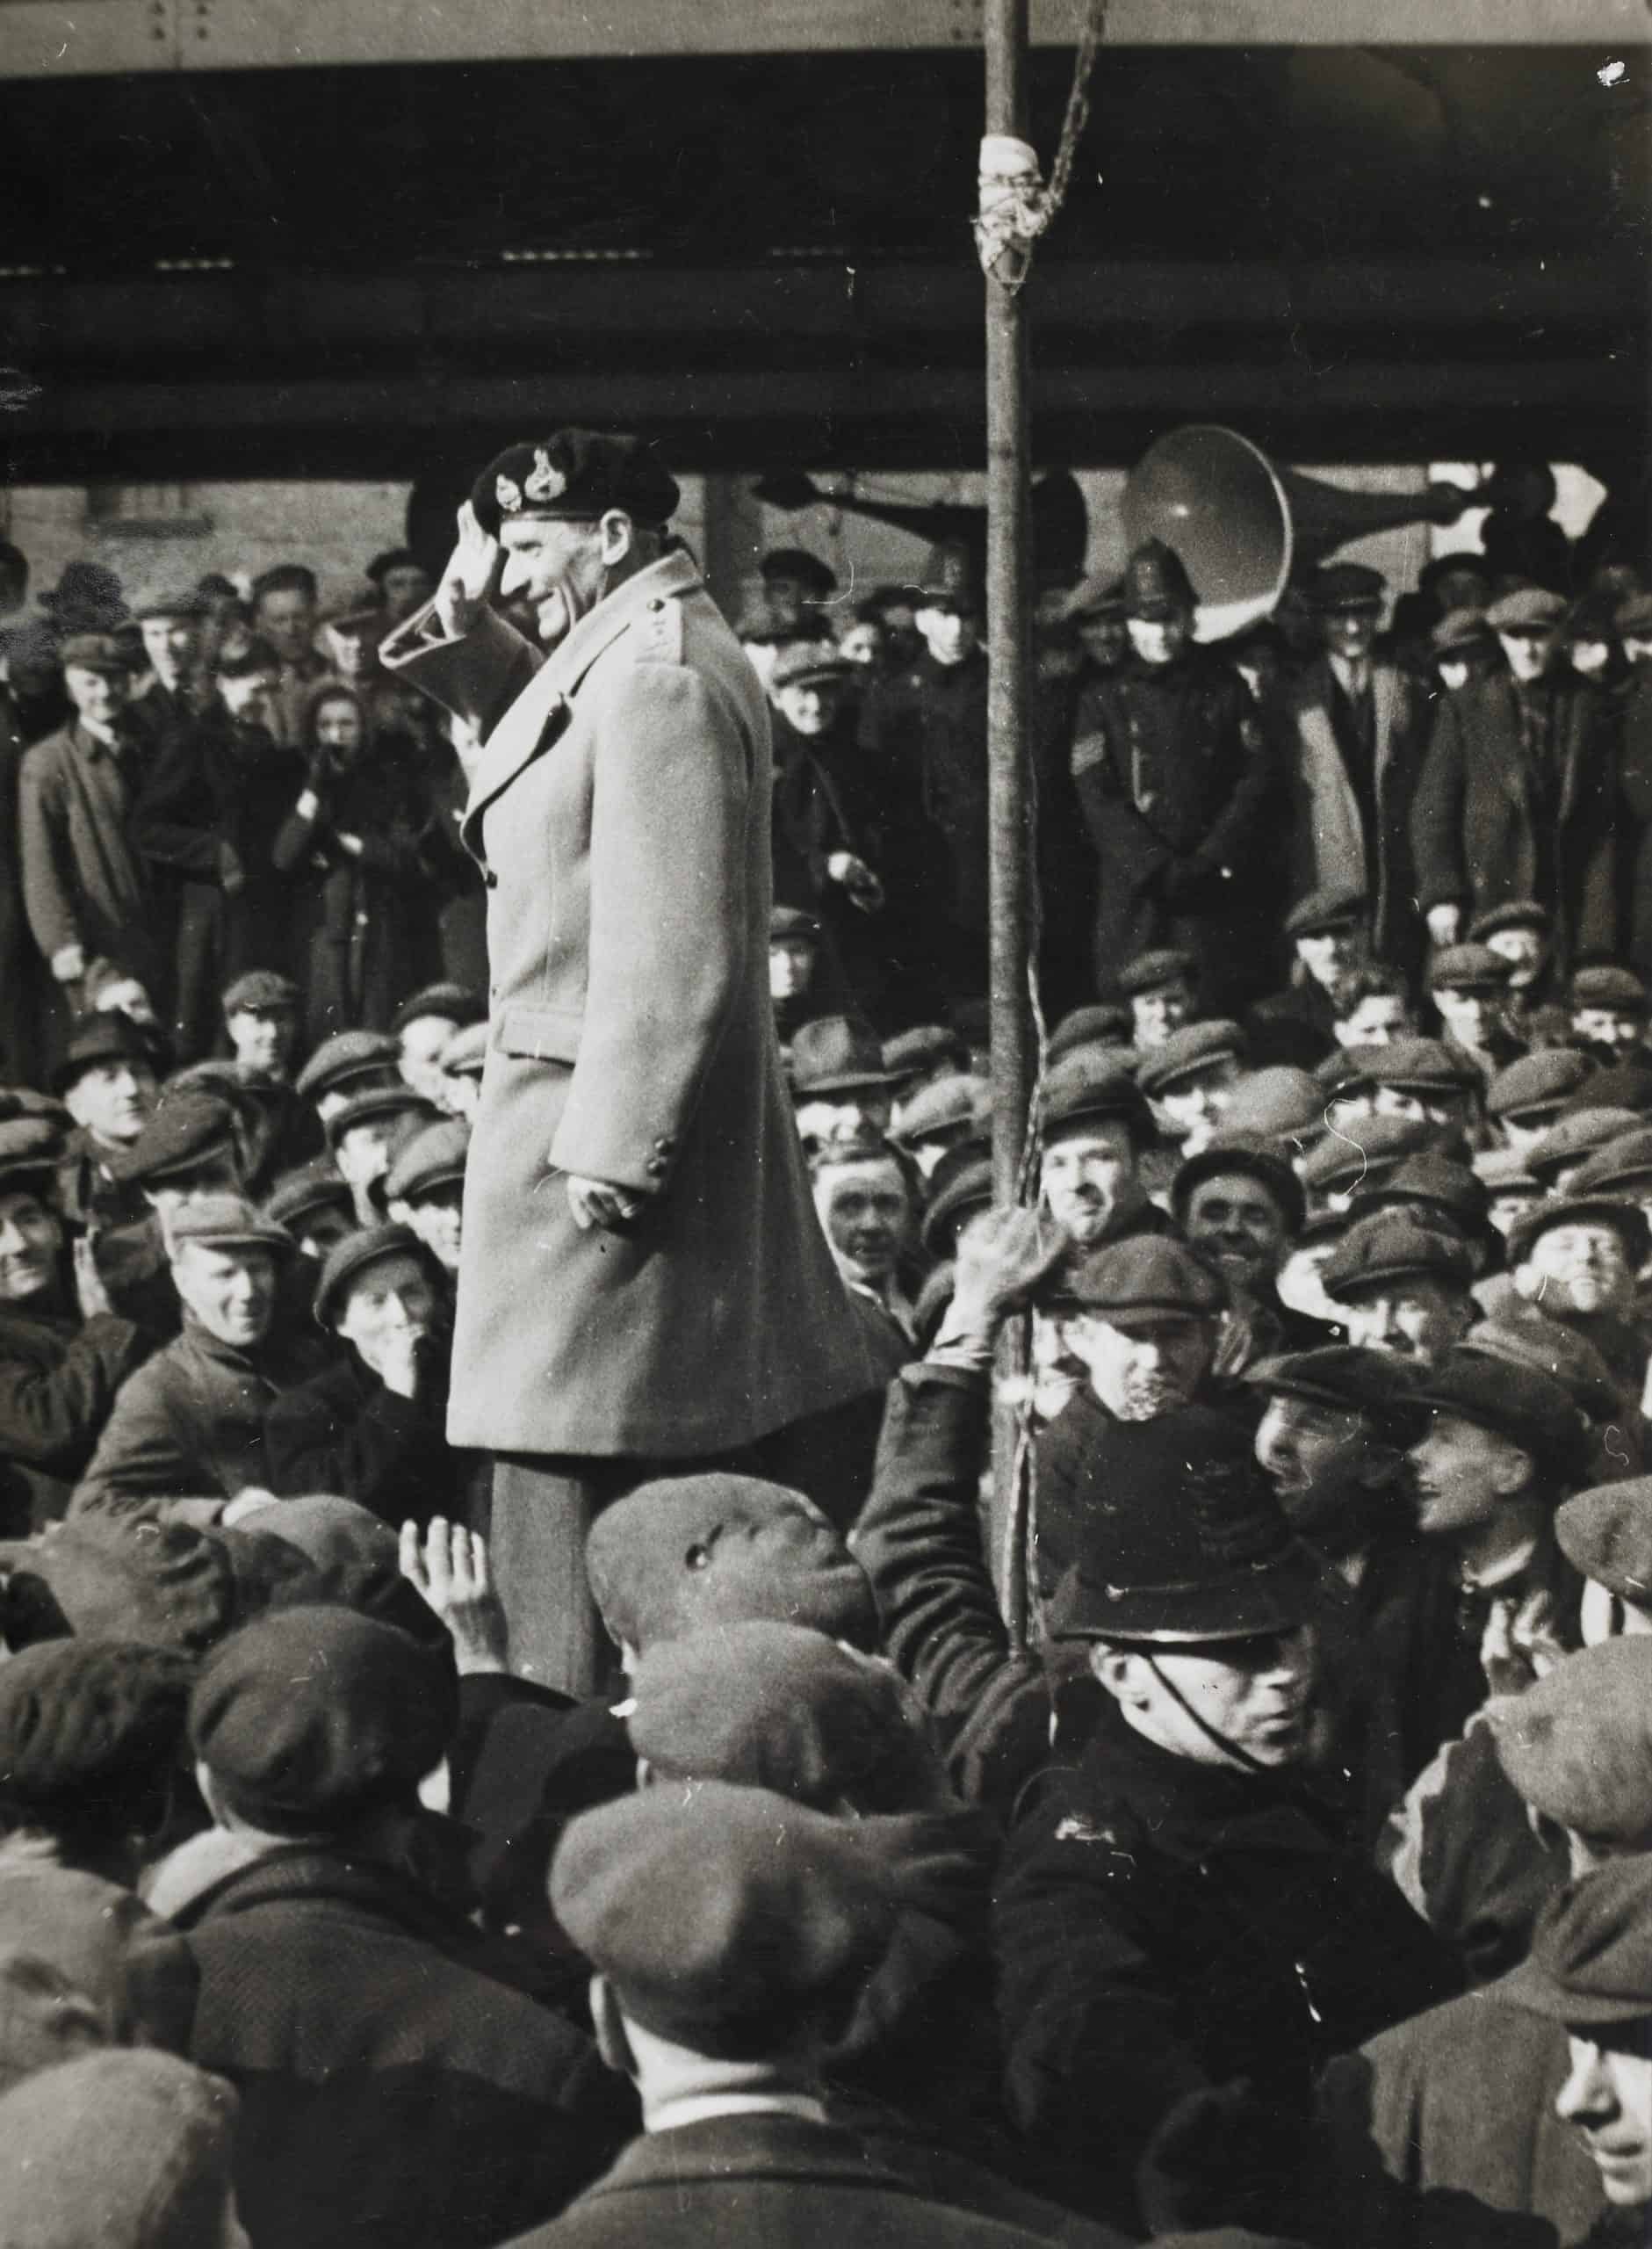 General Montgomery speaking to 16,000 port workers before the invasion of France in June 1944. His speach was relayed by microphone to every dock and major wharf in London. He was telling them of their vital role in the build up to D-Day.